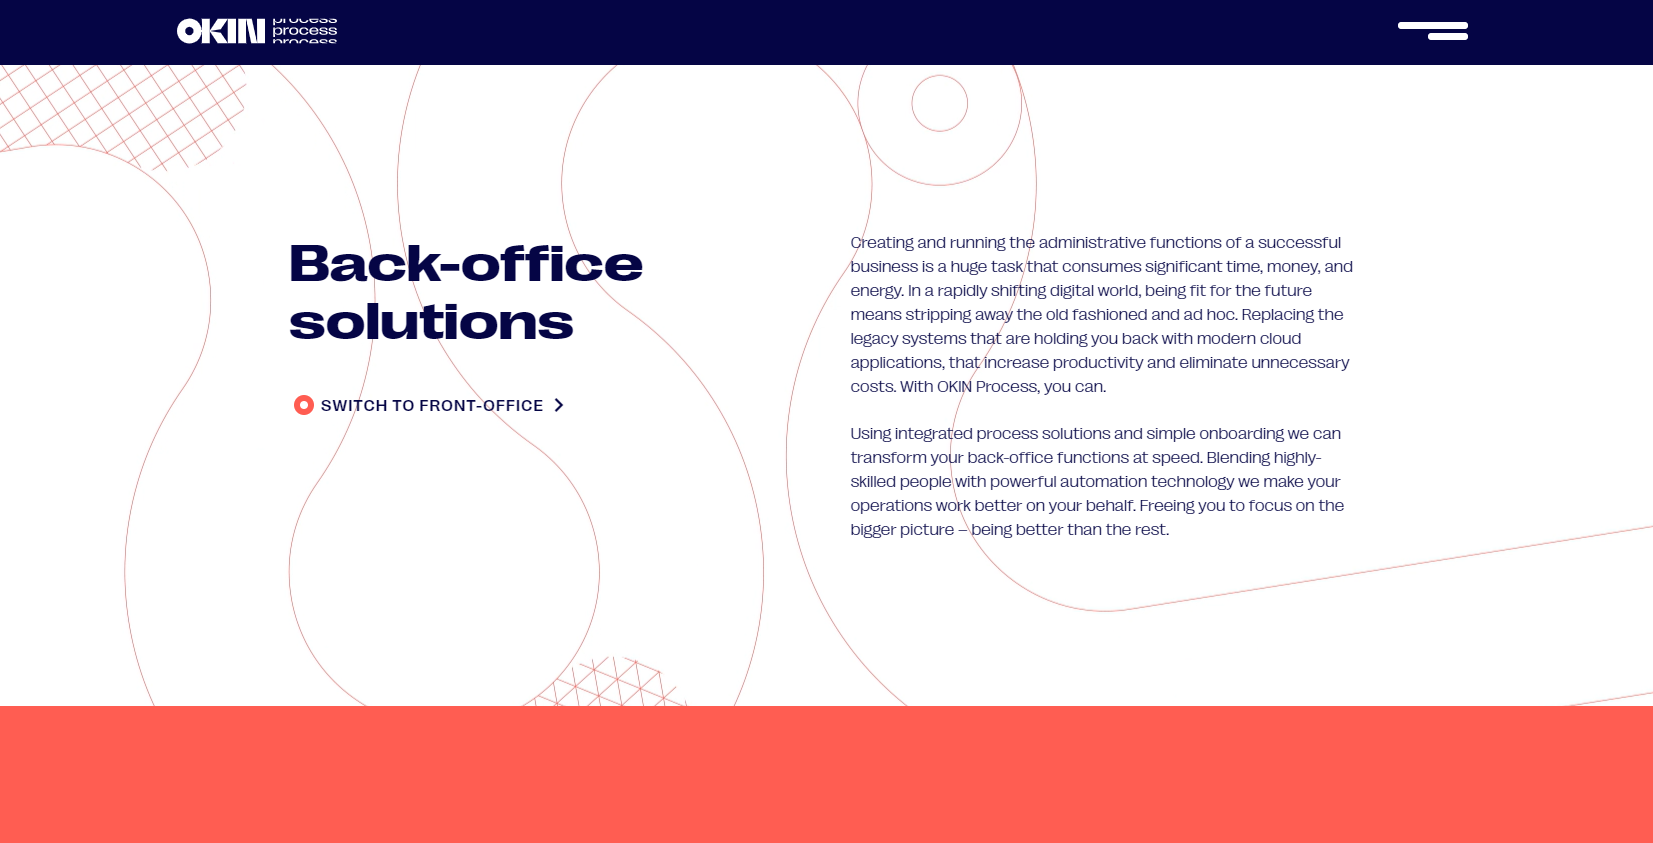 Back-office solutions to make your operations work better | OKIN Process